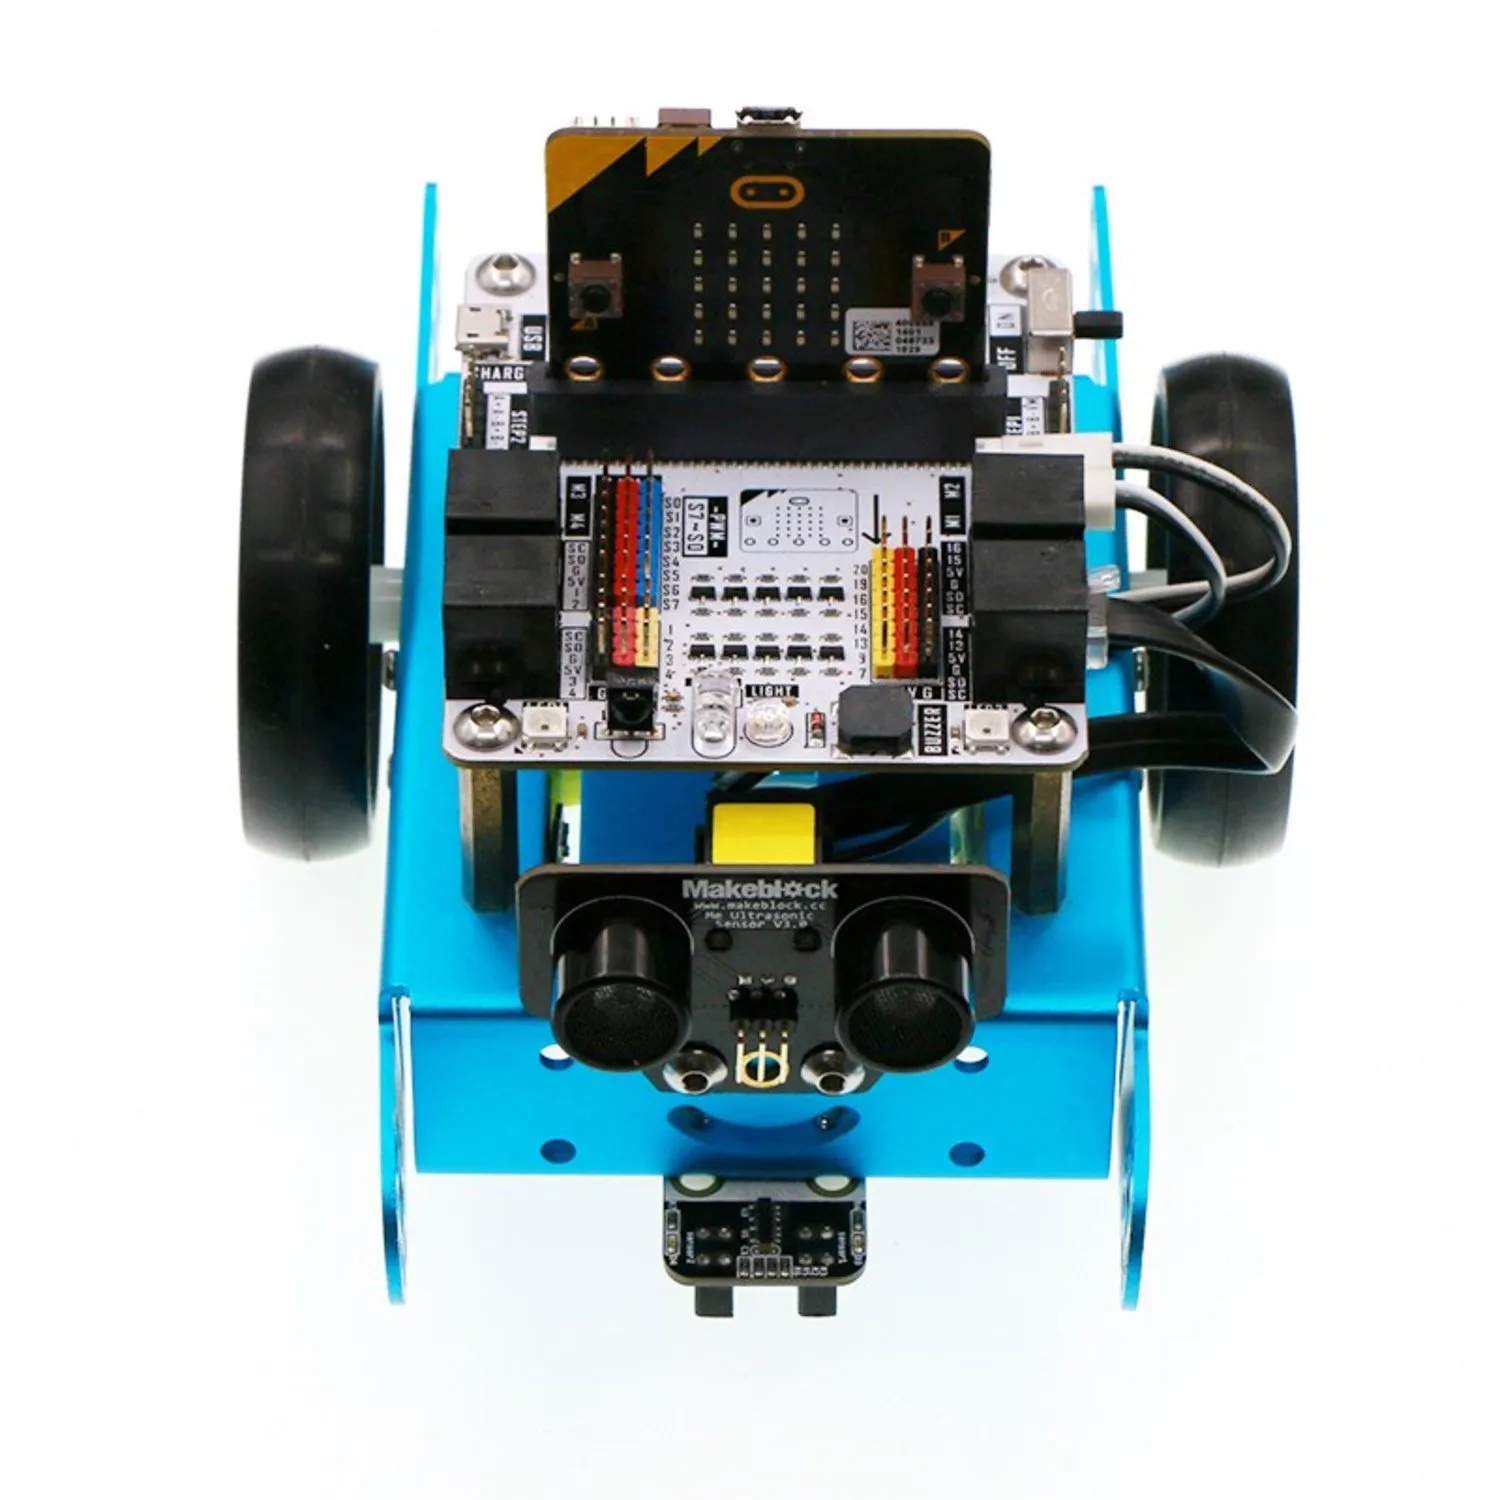 Photo of Robit - micro:bit board compatible with mbot